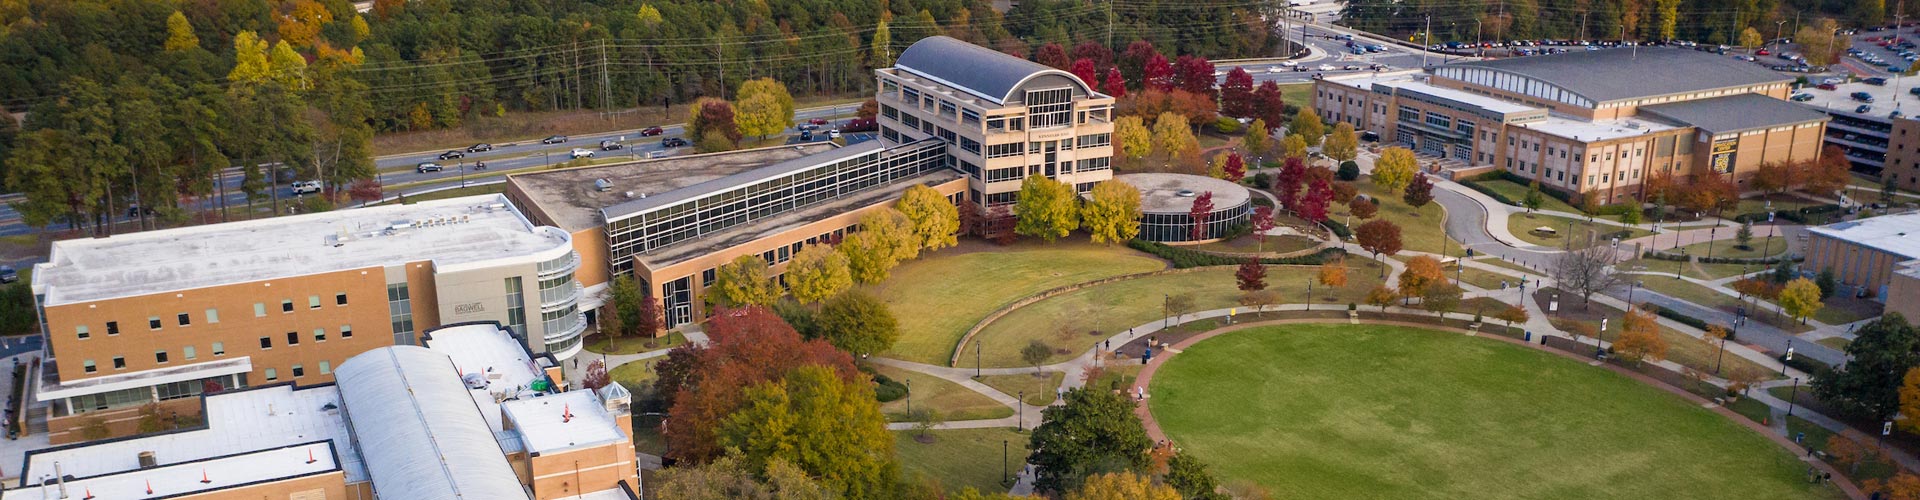 Kennesaw Hall and Campus Green